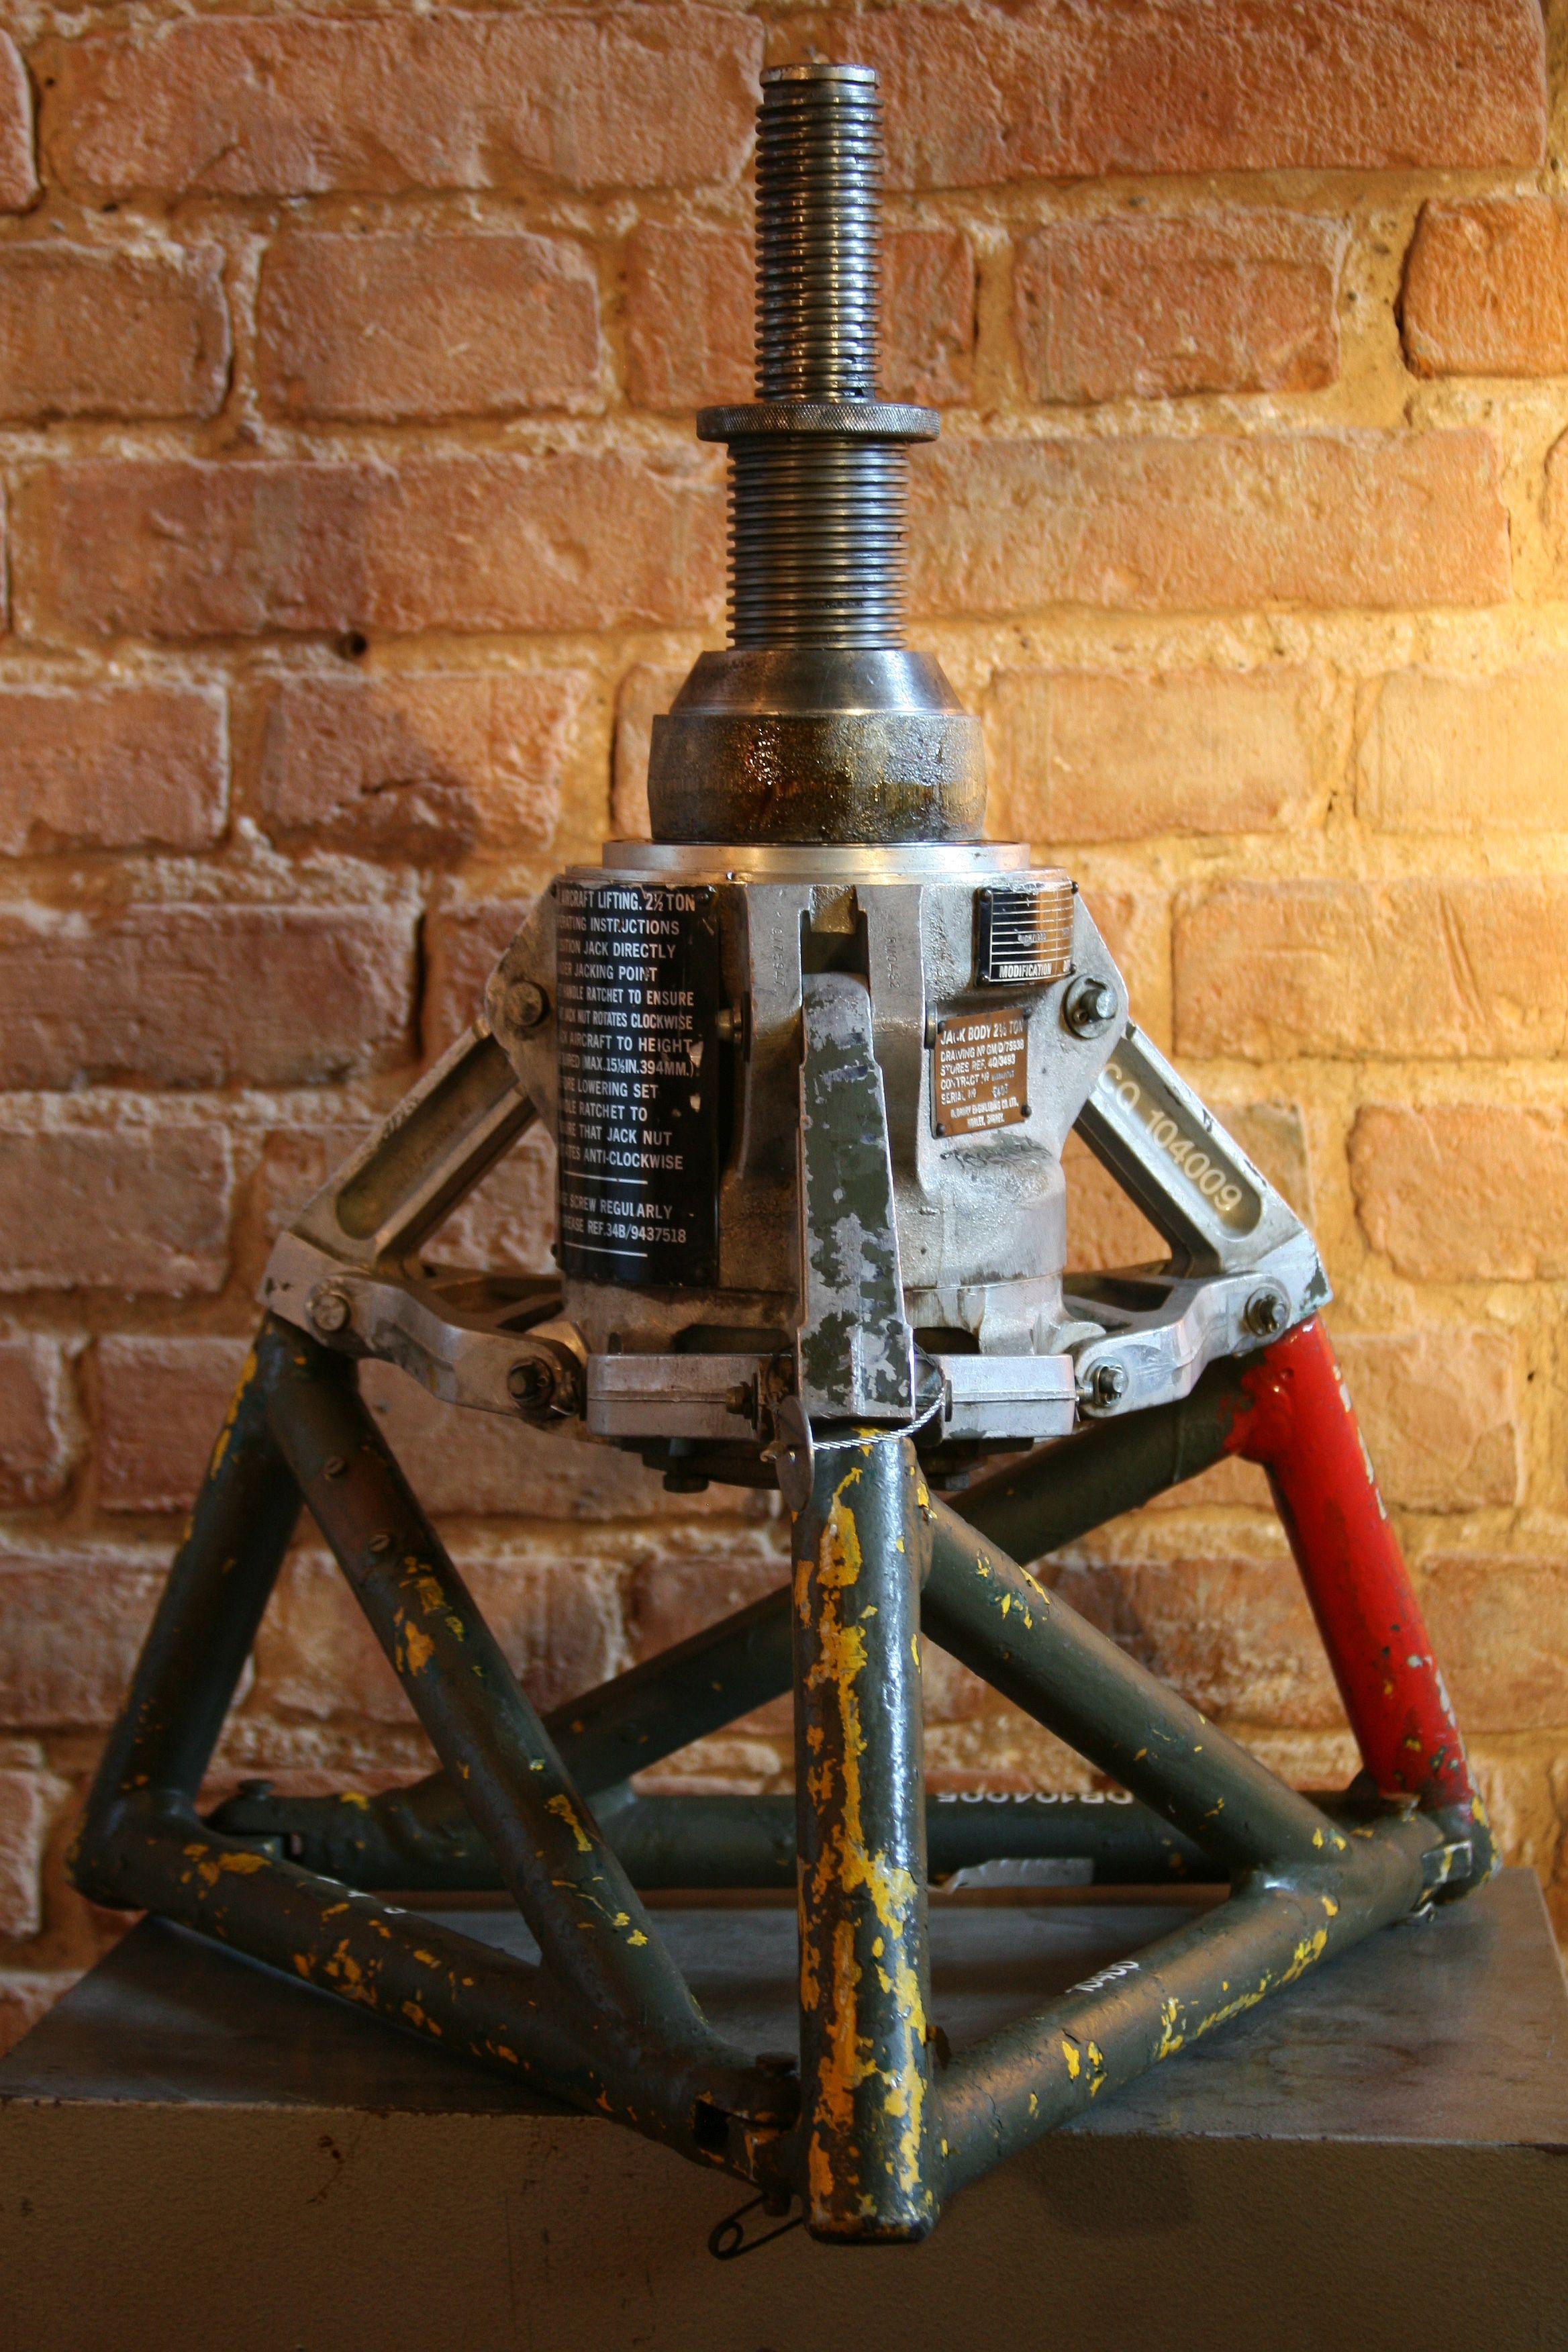 The original air hydraulic jack with a lifting capacity of 2.5 T, used by the Air Force of the United Kingdom.
Manufacturer: Oldbury Engineering Co. L.T.D.
Production year: 1978

Construction:
Jack’s body and fixing brackets are made of